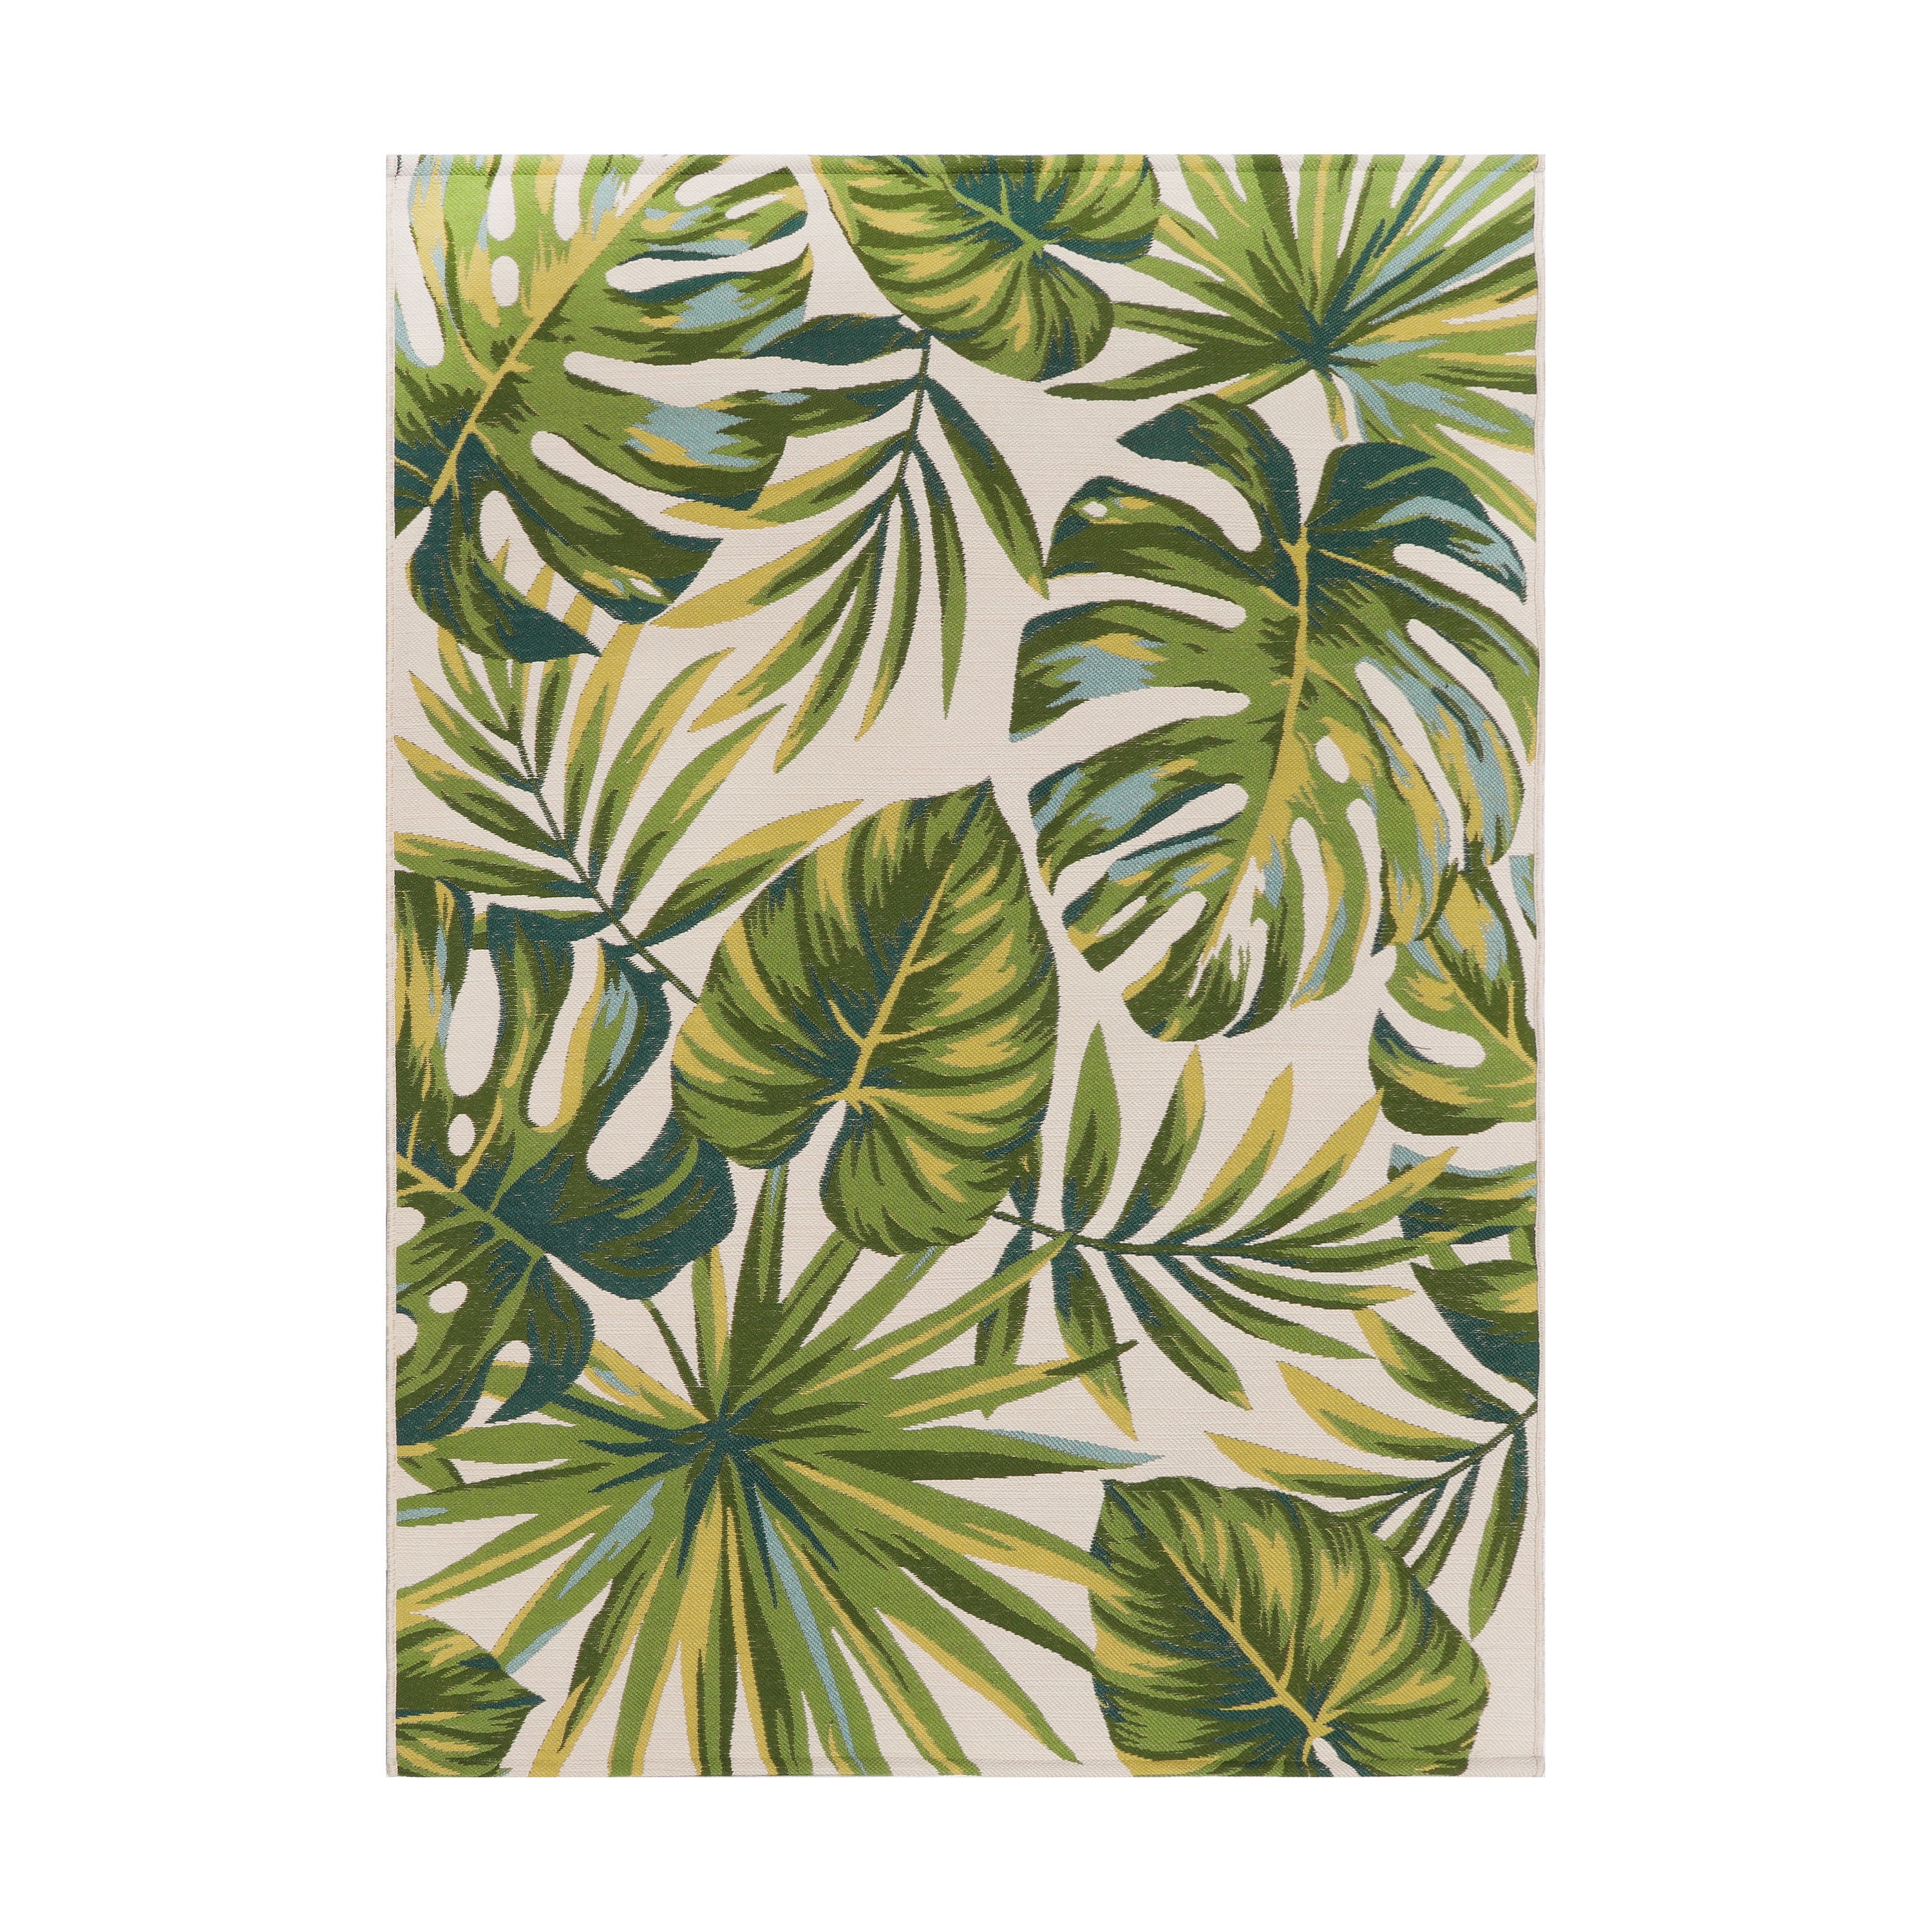 7' x 10' Better Homes & Gardens Green Palm Leaf Woven Outdoor Rug $79 + Free Shipping